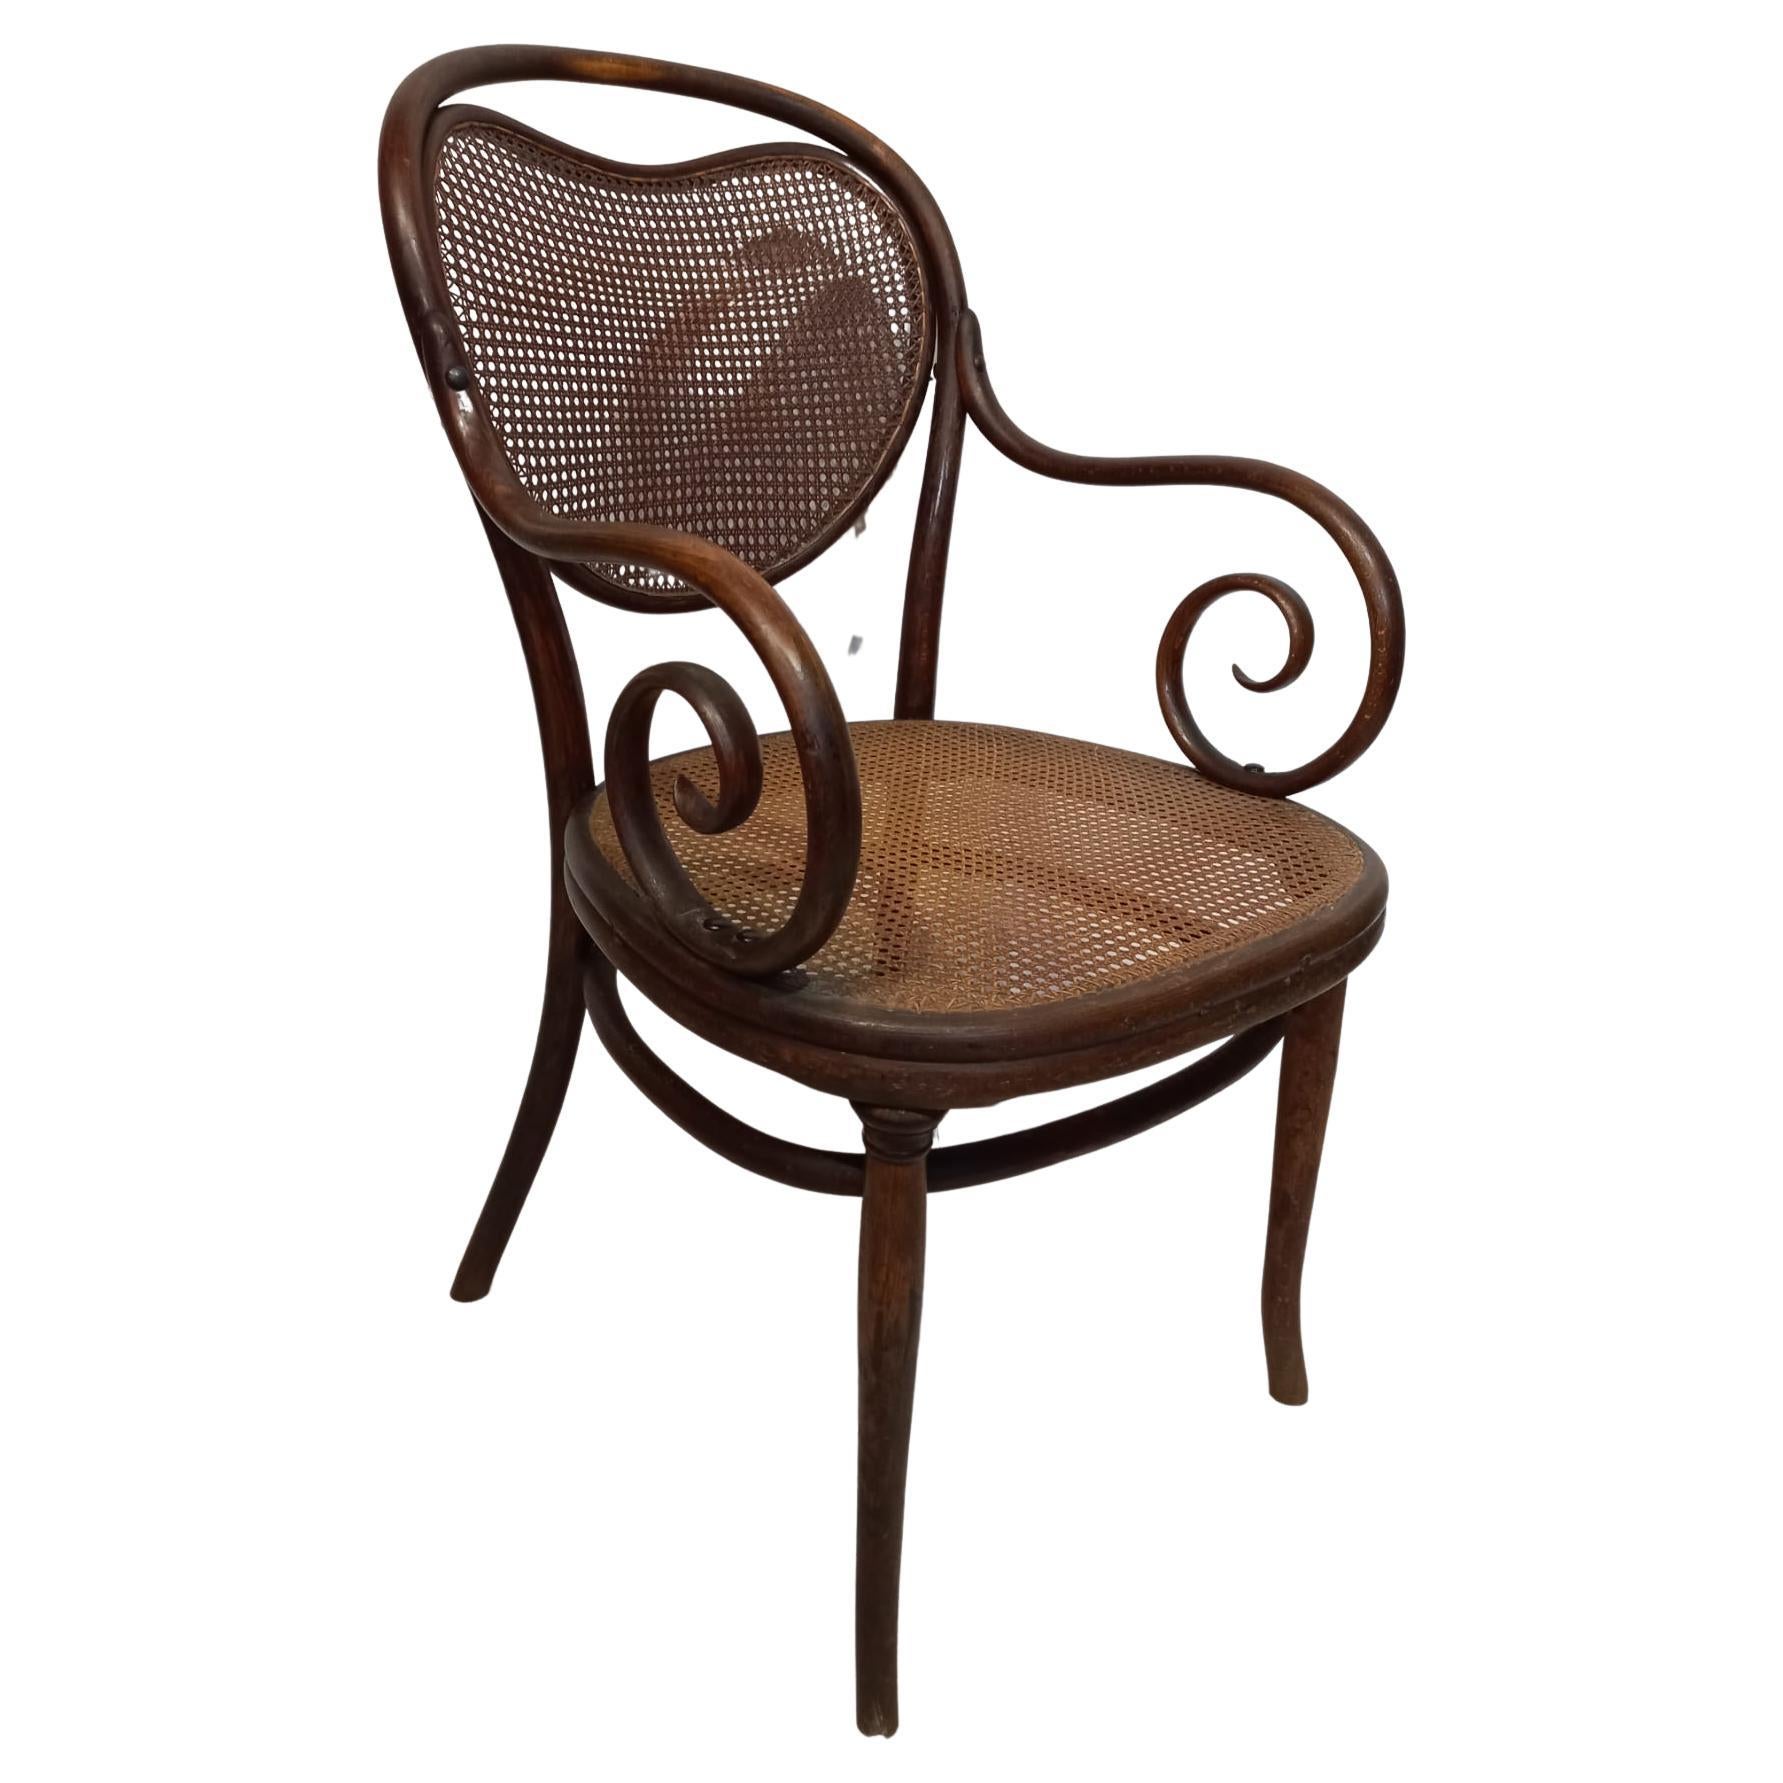 Thonet chair from the 1870s with curved armrests